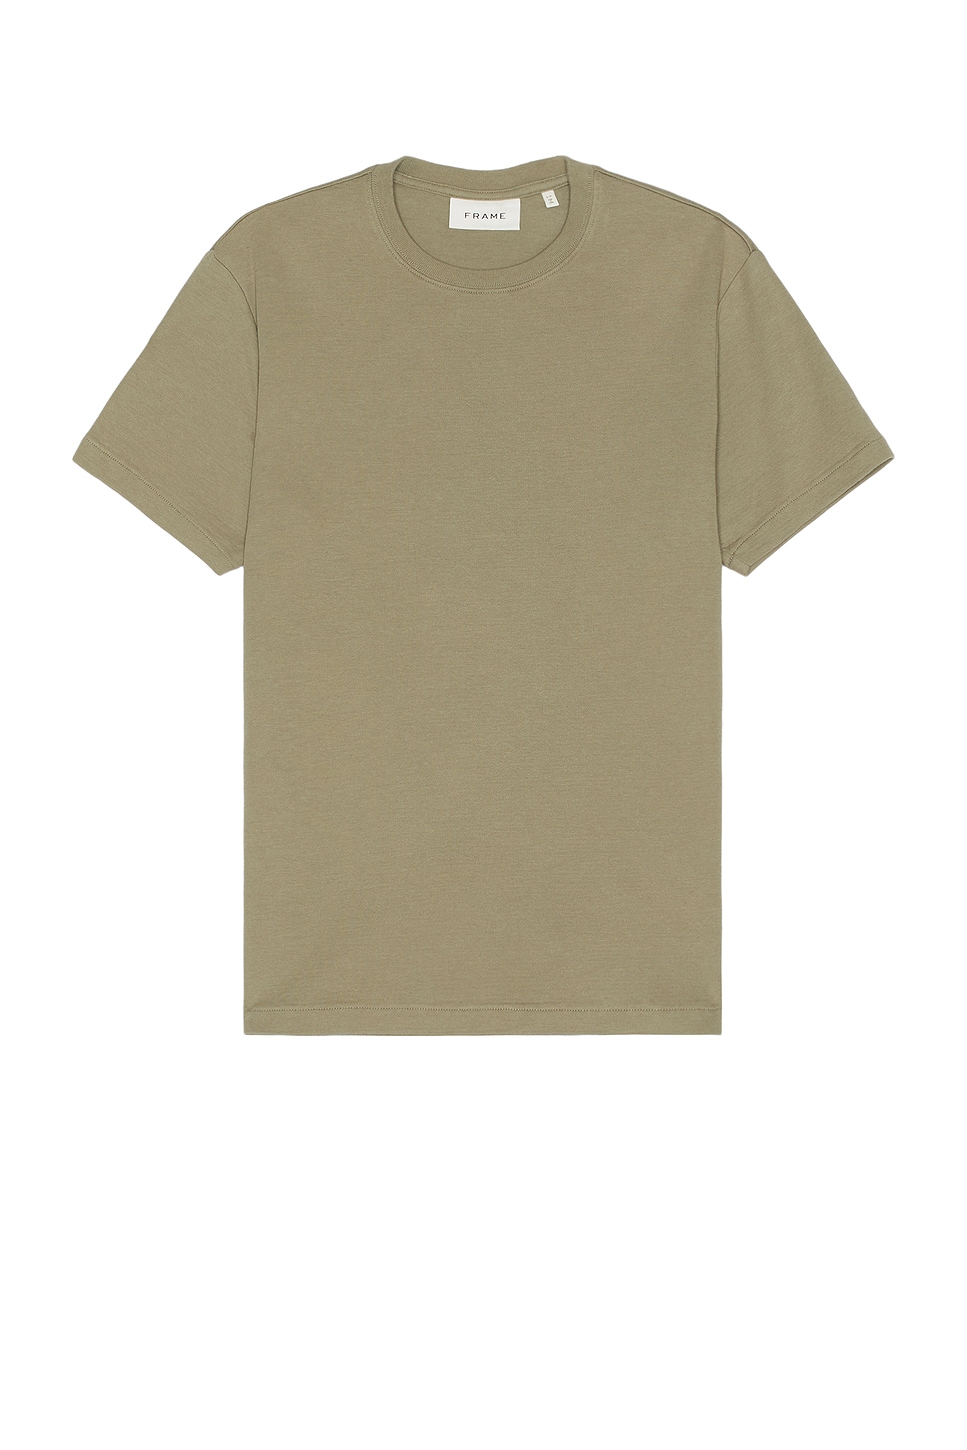 Image 1 of FRAME Duo Fold Tee in Dry Sage